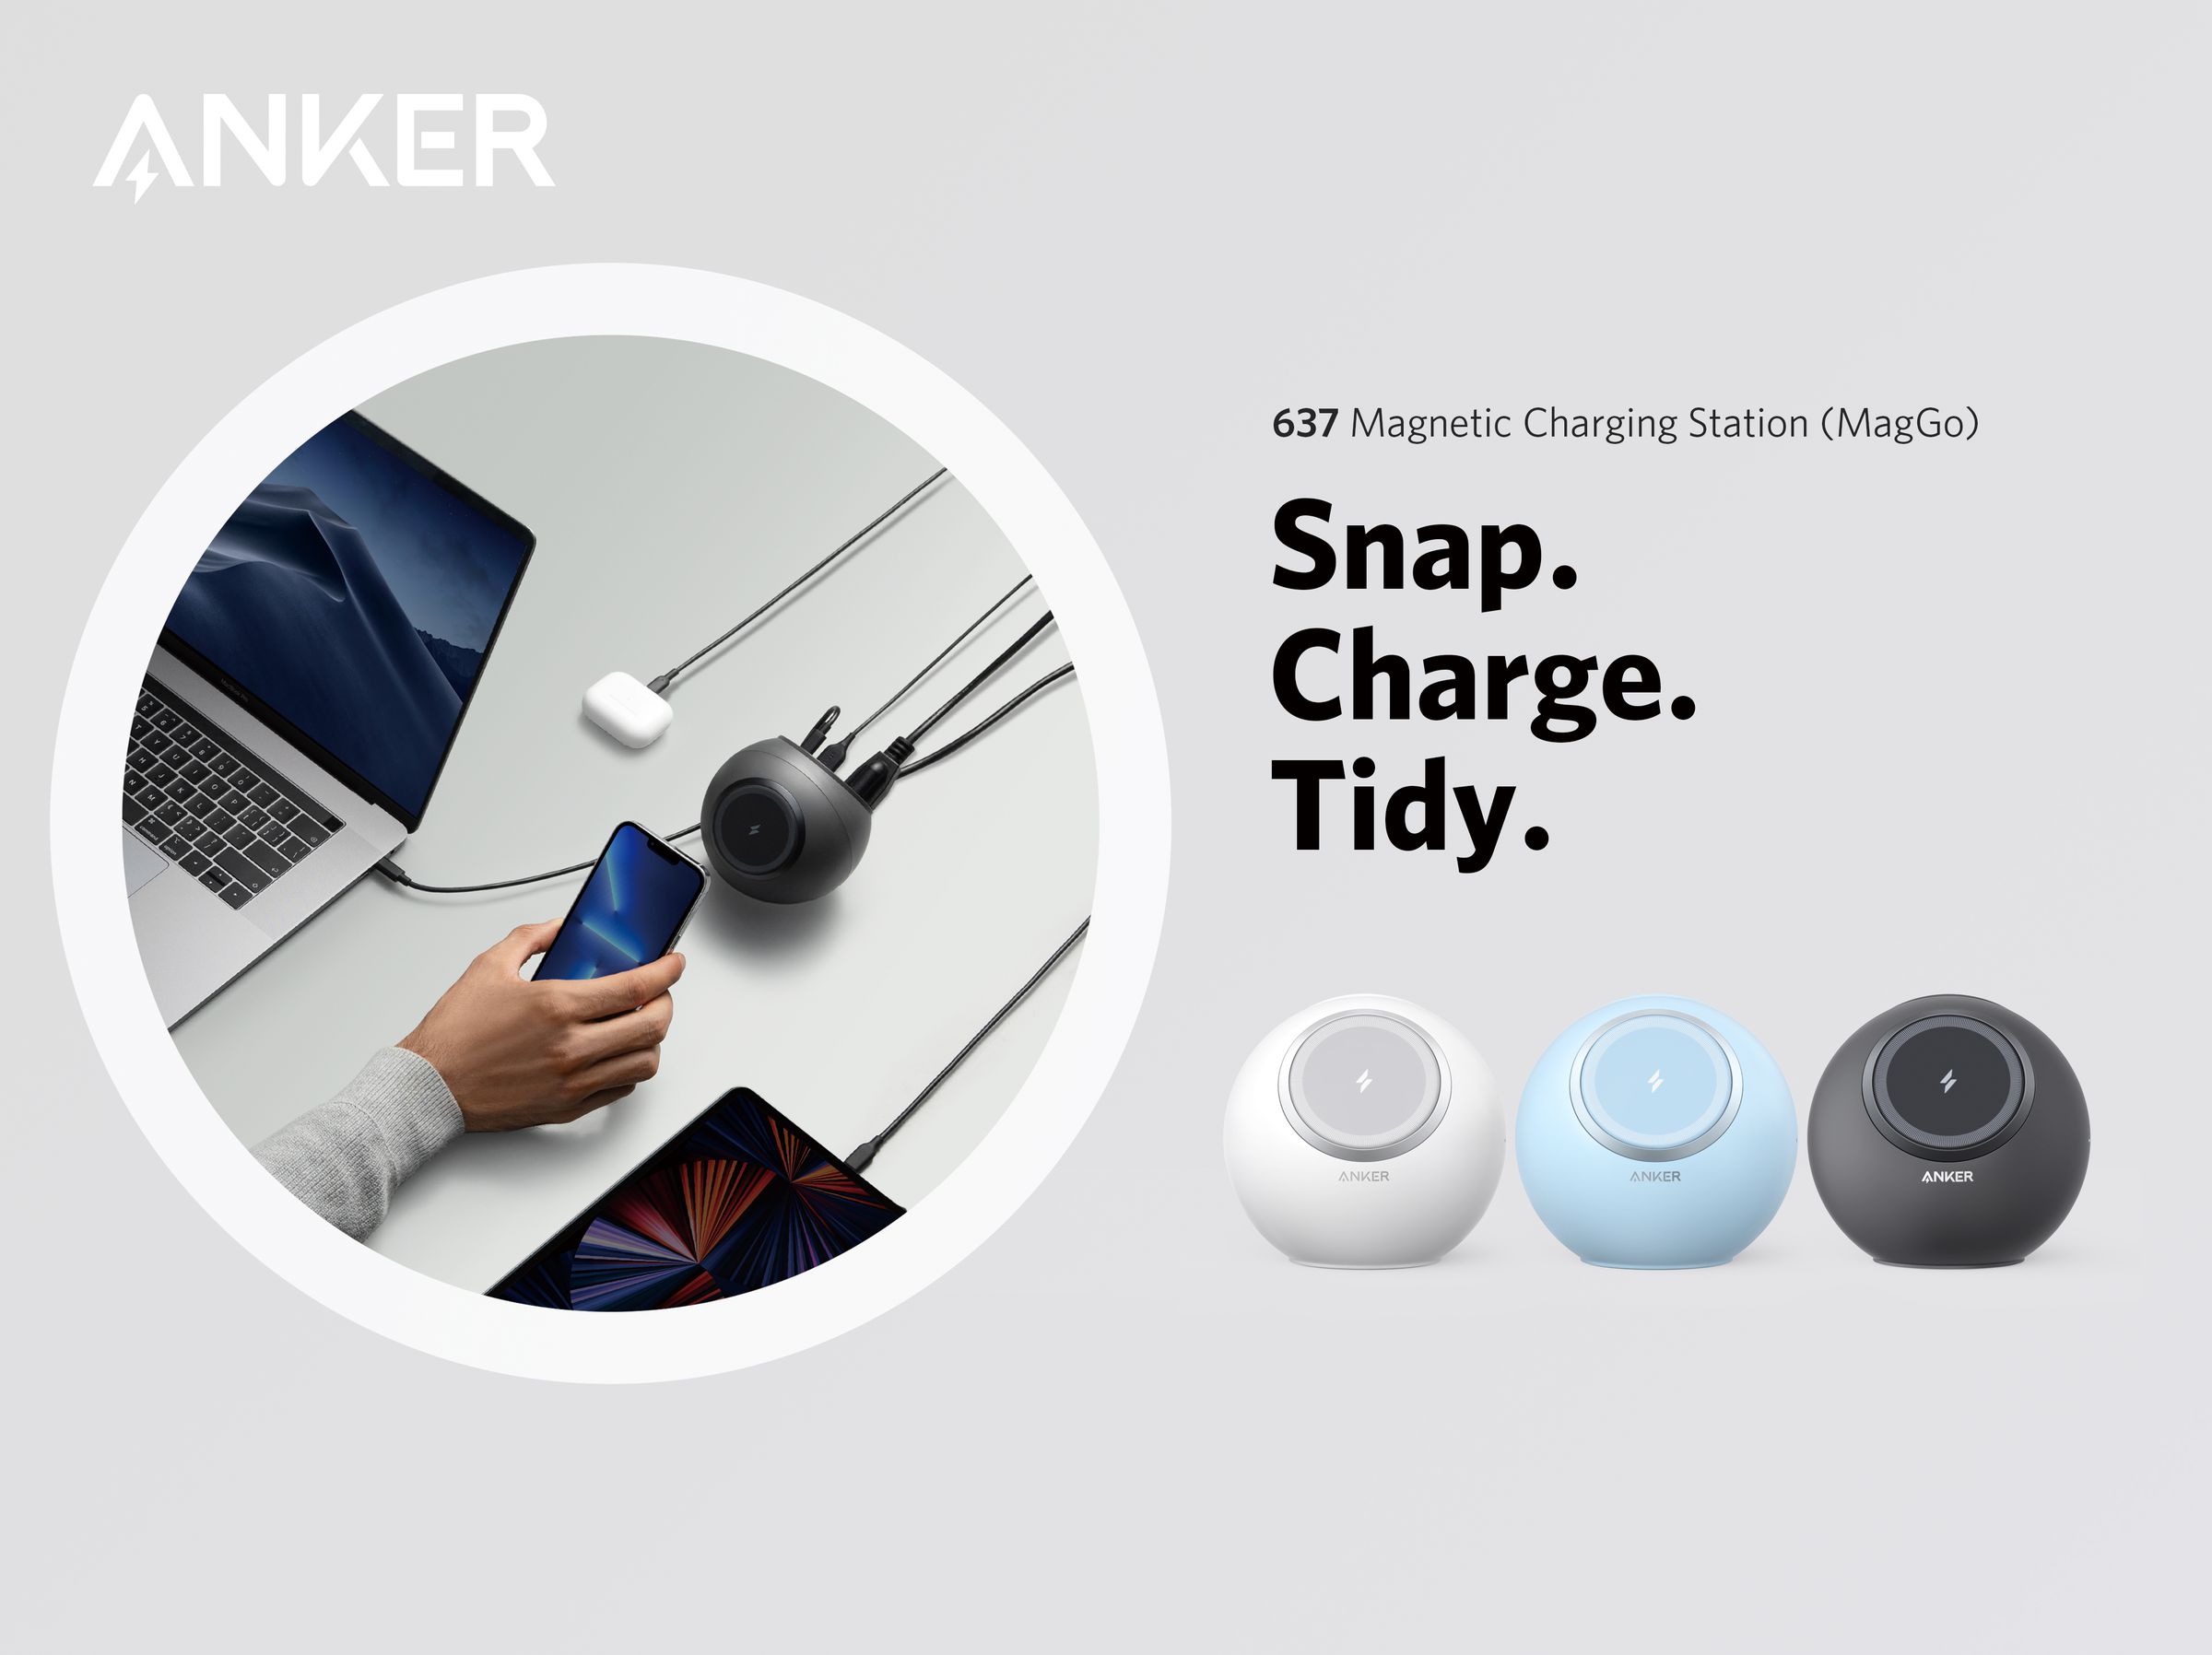 Anker MagGo Magnetic Charging Station looks like a desktop speaker but it’s really a charging hub for all your gadgets.